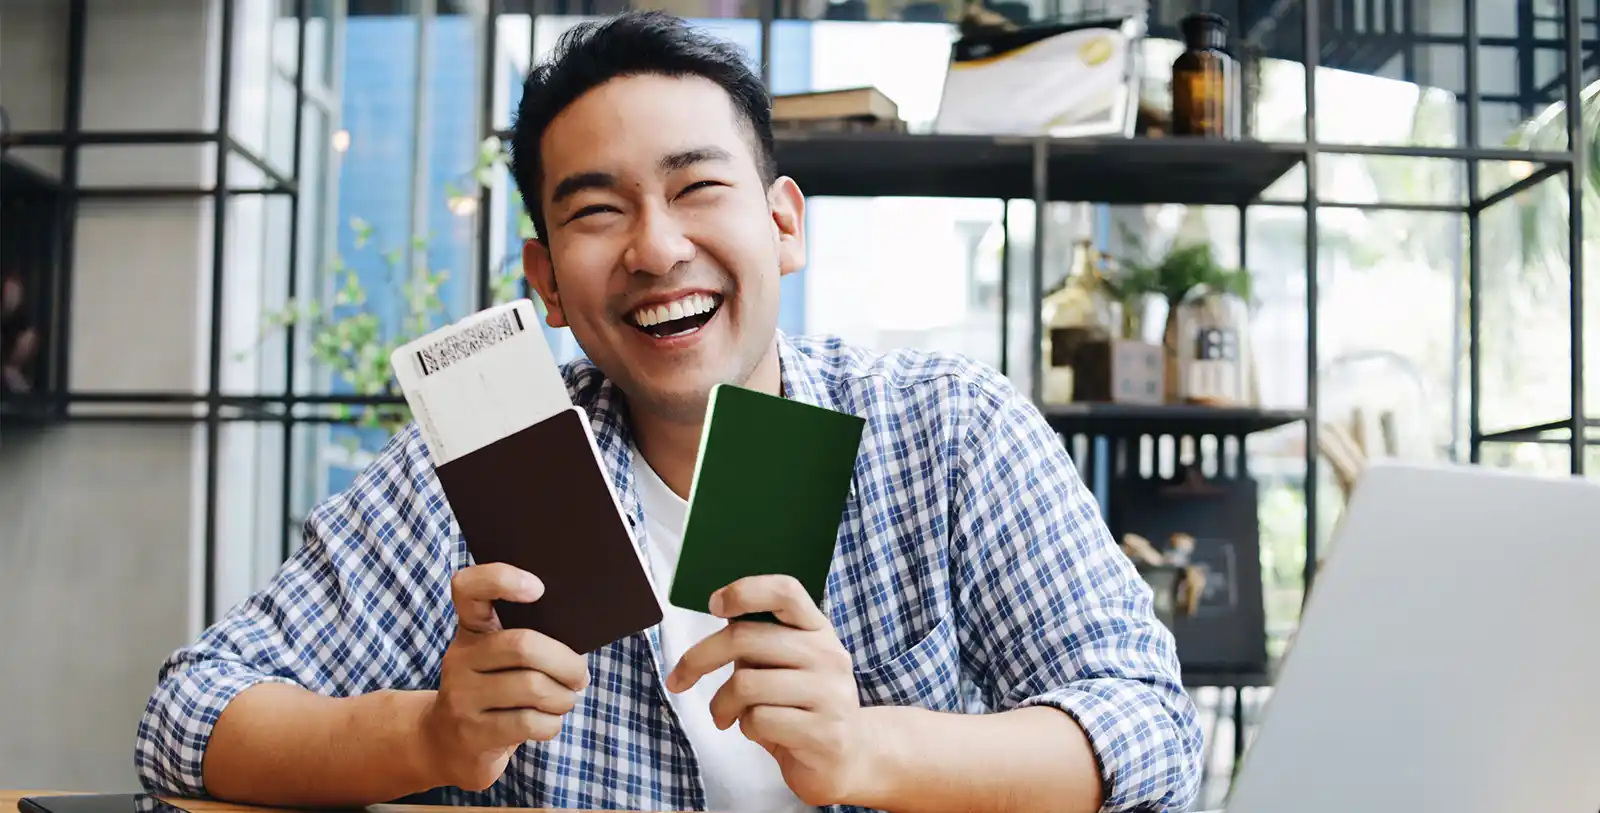 A happy man with two passports: dual citizenship gives you enourmous freedom